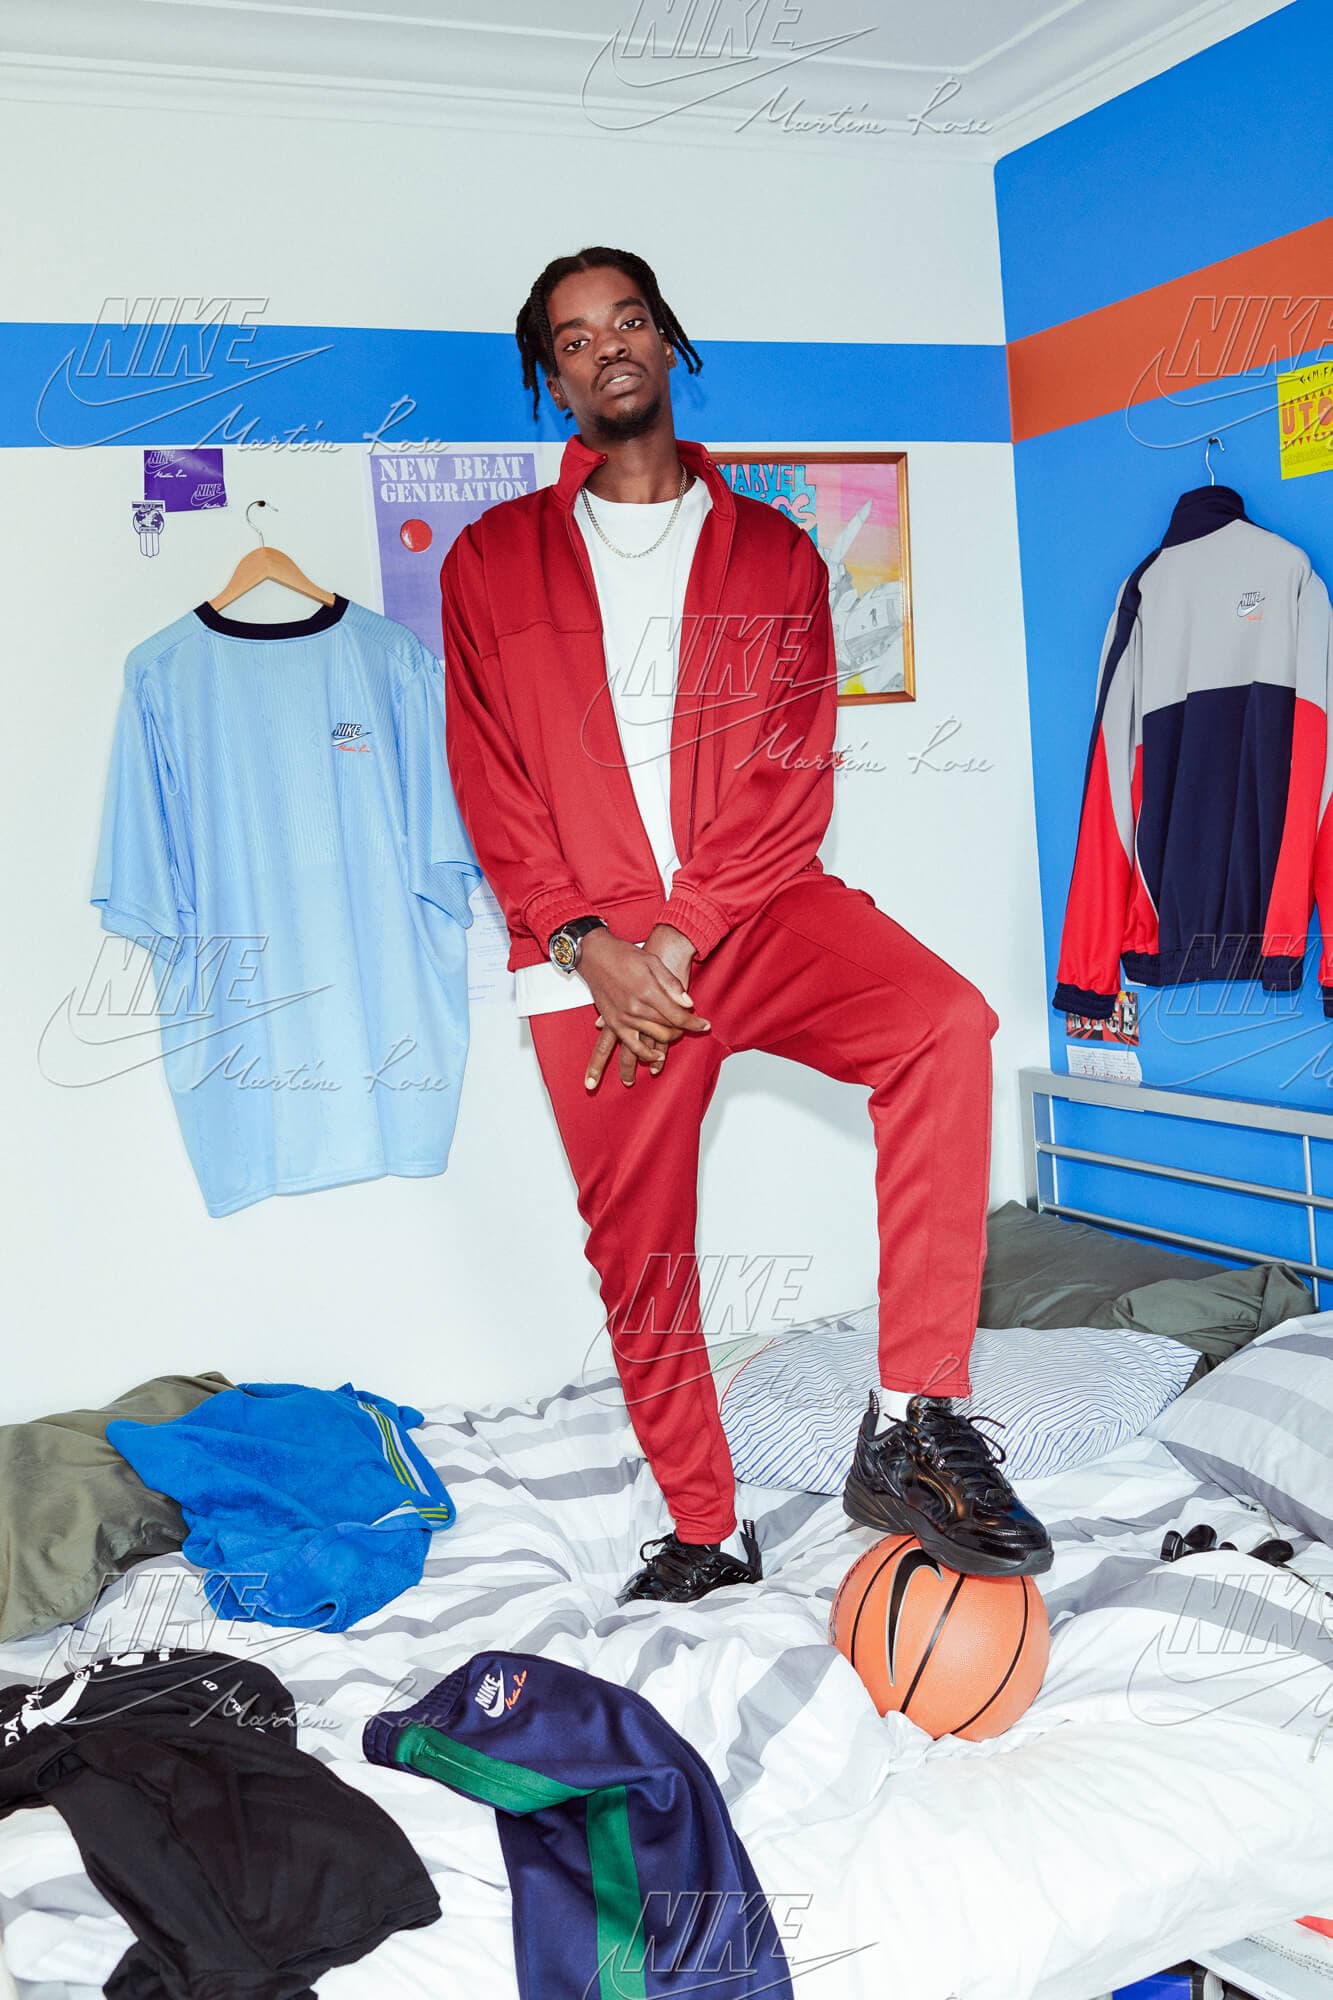 Nike x Martine Rose Viral Campaign - The first campaign to be launched on Craigslist with uniquely lovable characters re-selling their tracksuits and sneakers